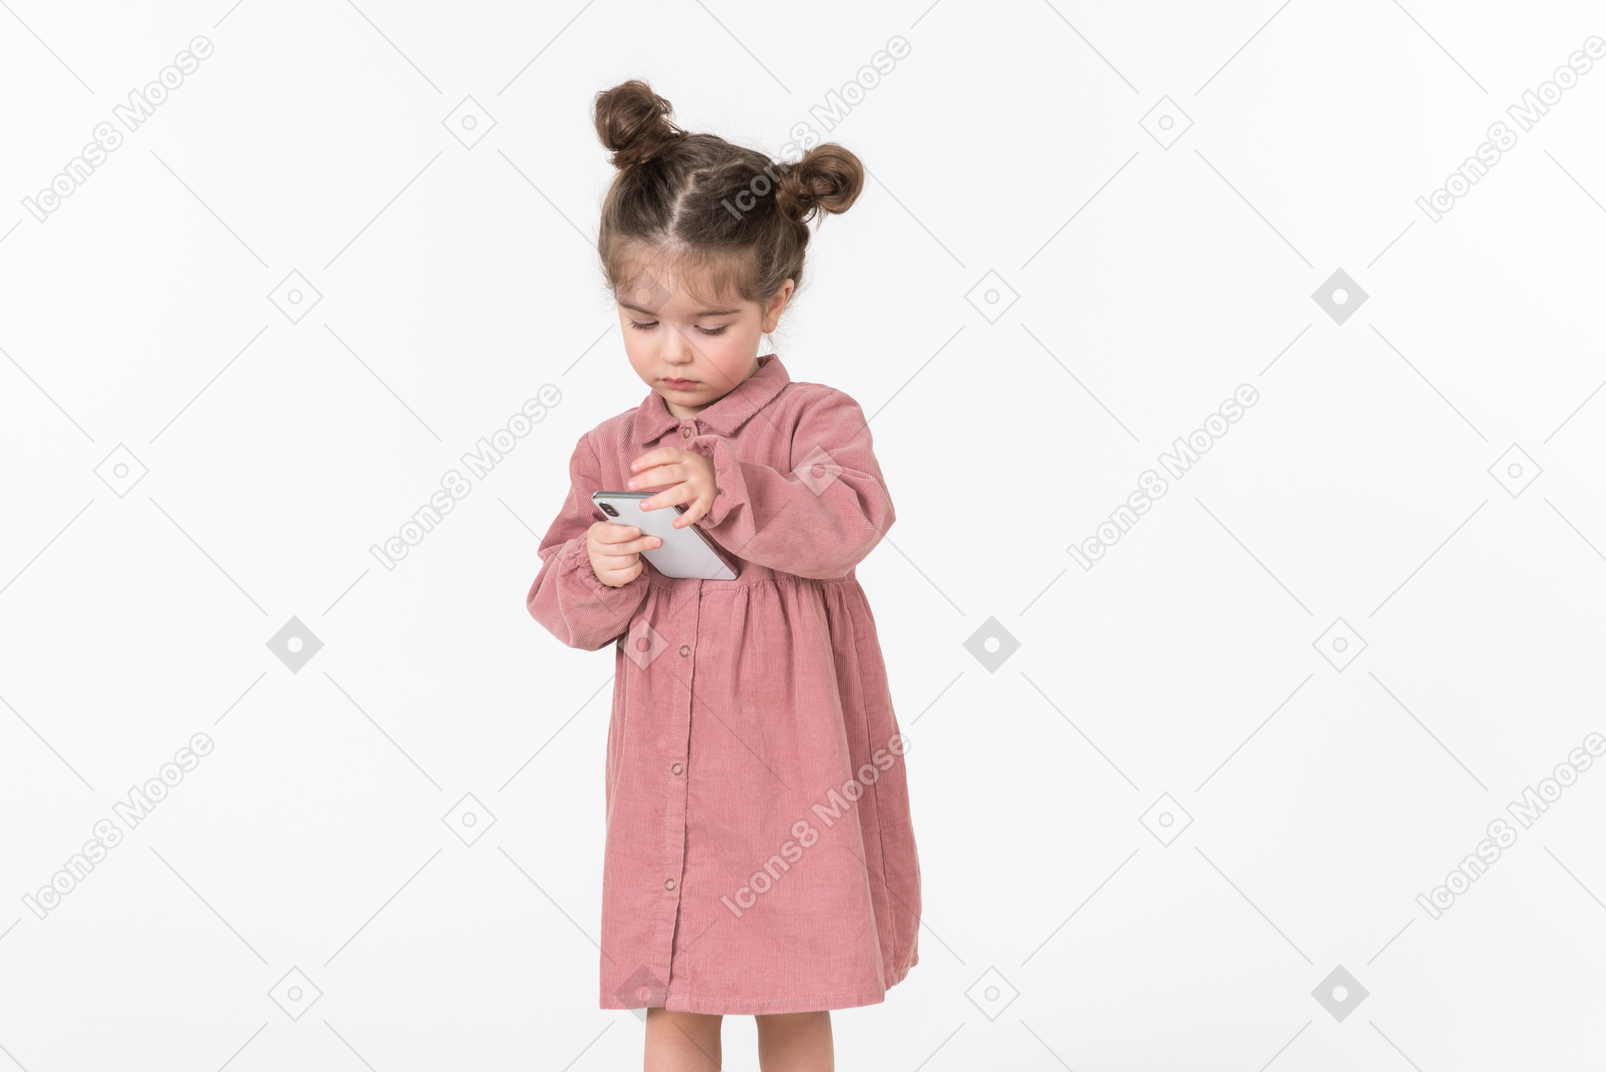 Little kid girl looking at smartphone